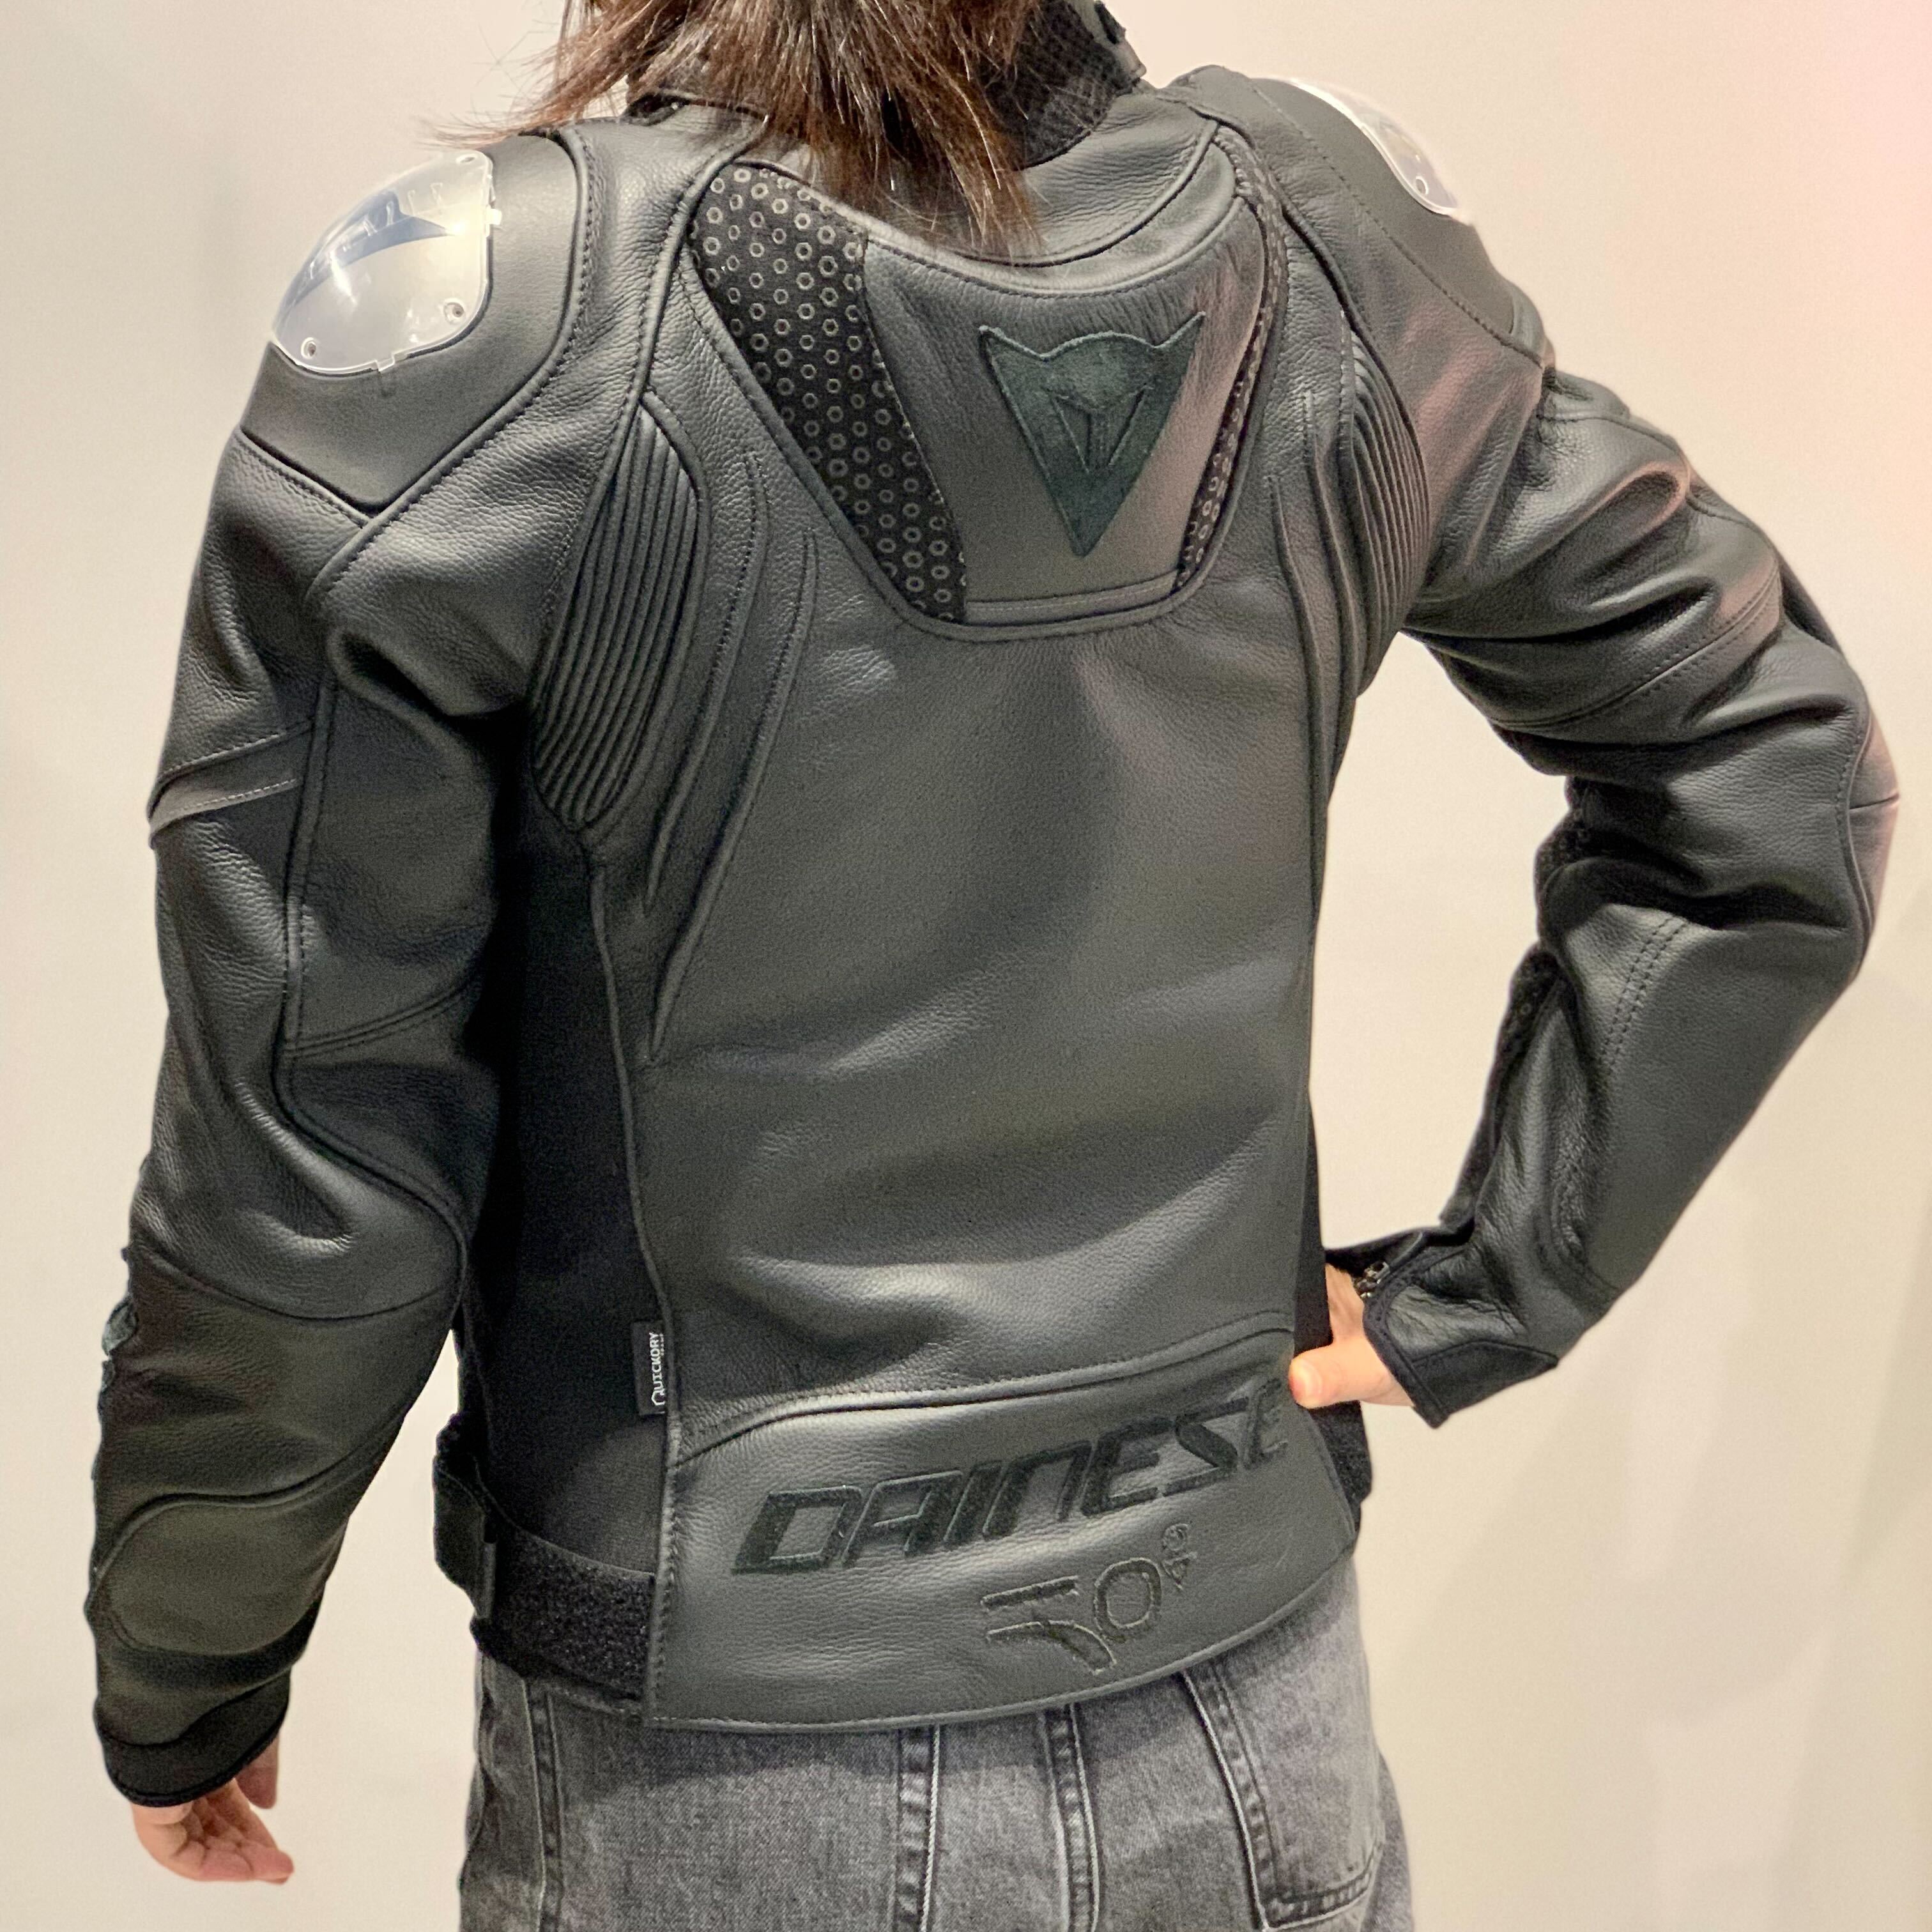 DAINESE 50th Anniversary leather jacket変更致しますね